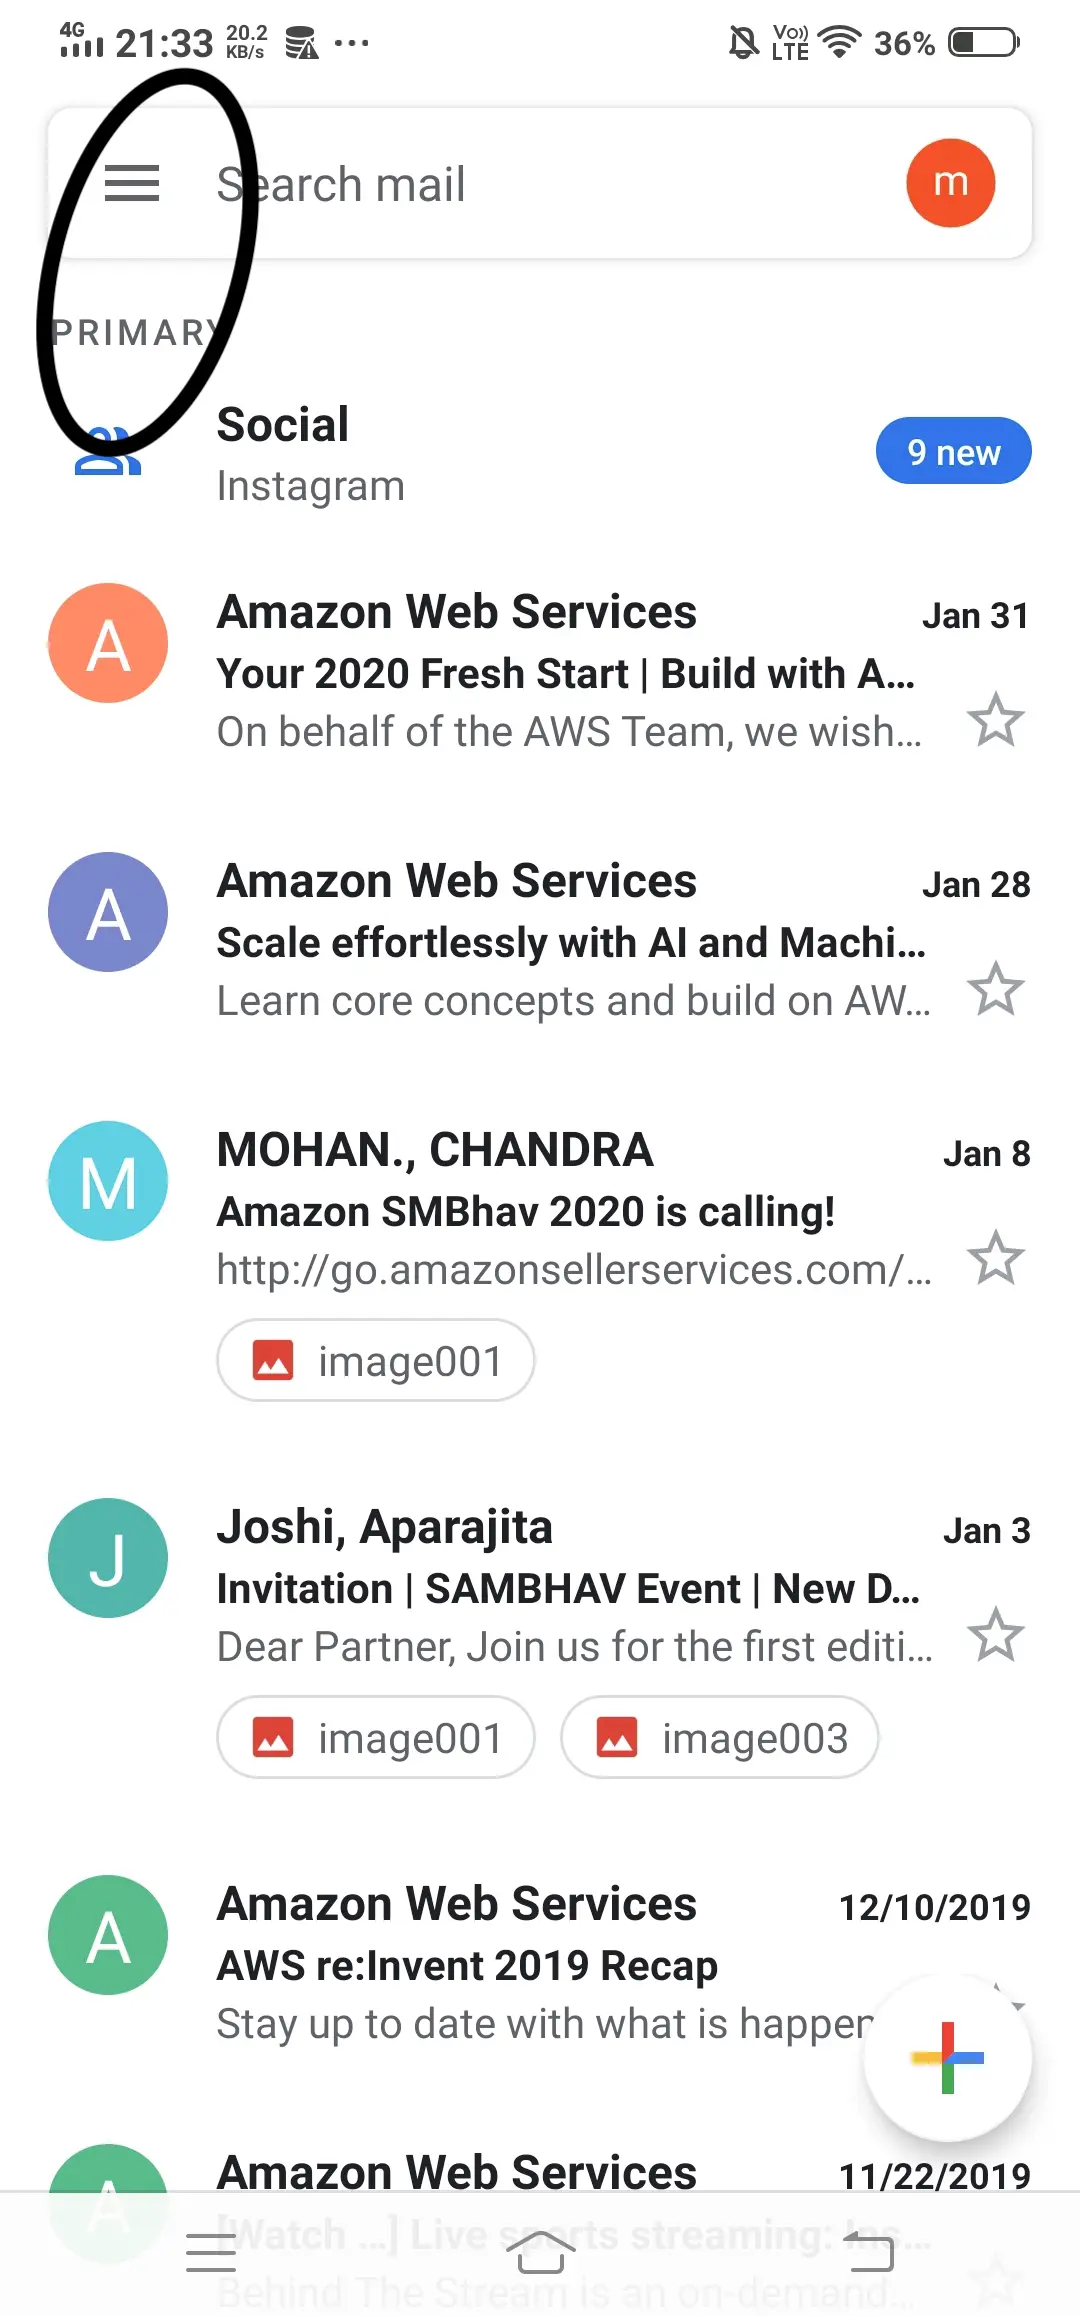 find archived emails on gmail app